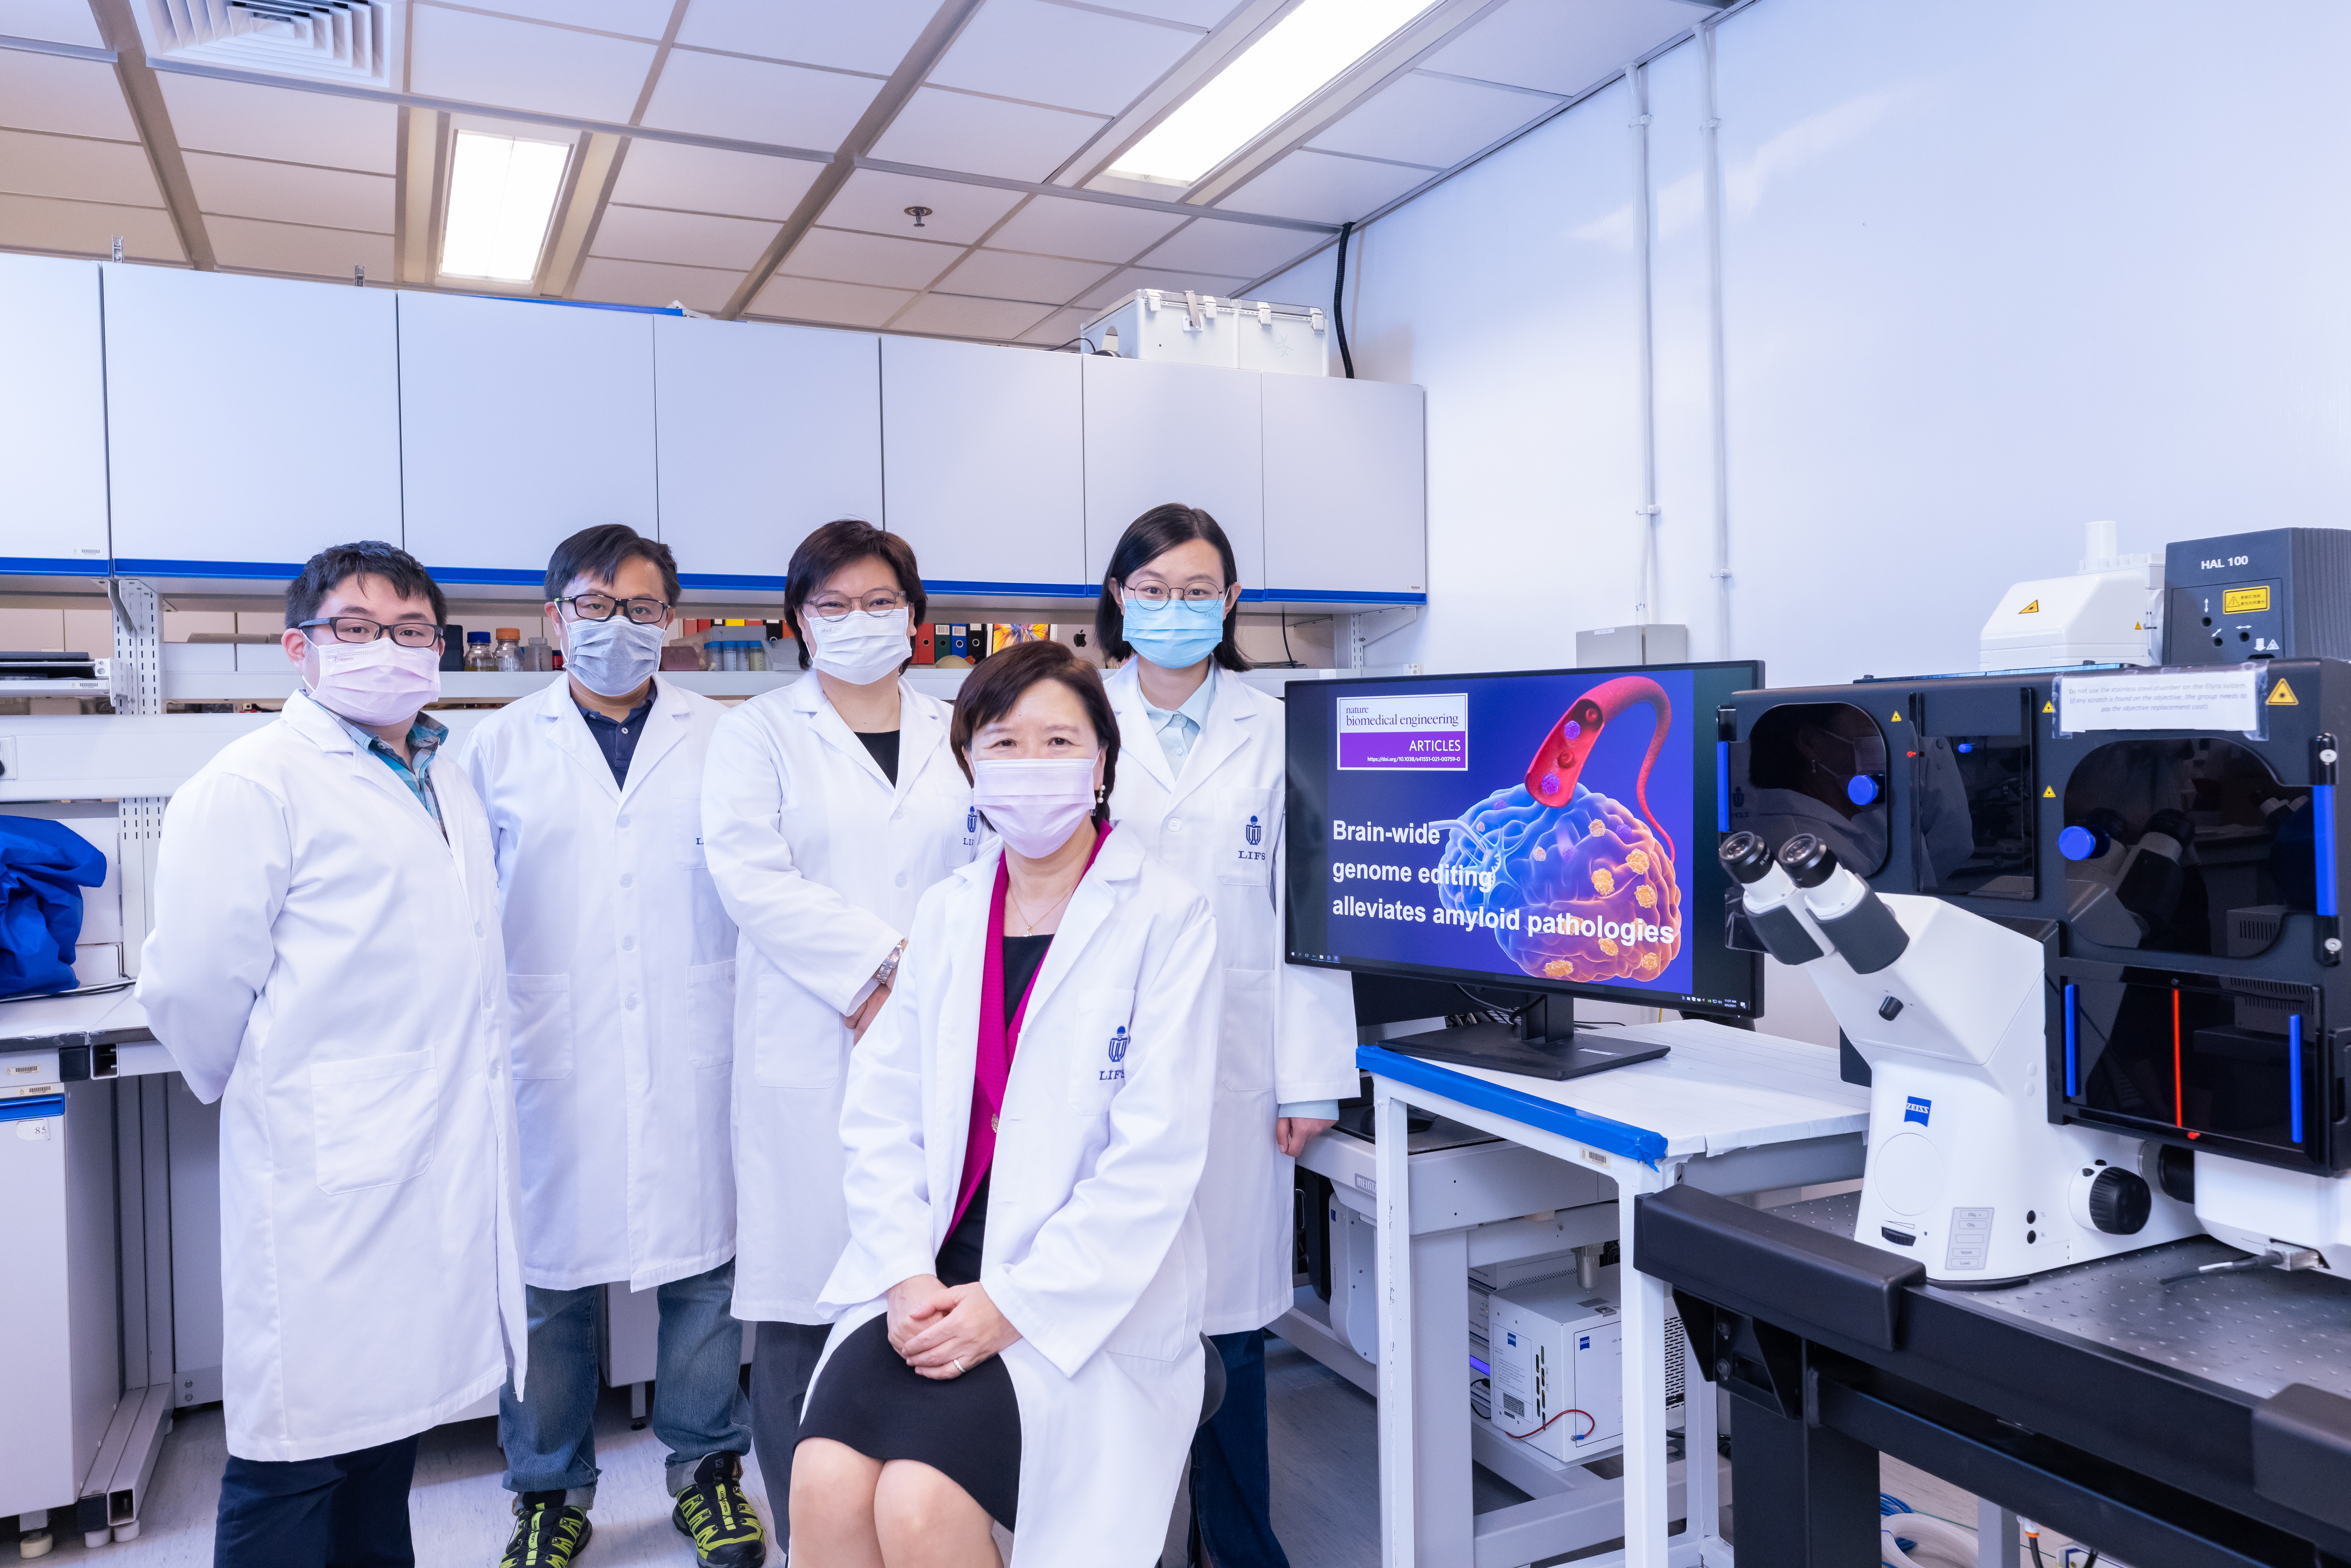 HKUST's Vice-President for Research and Development, Prof. Nancy Ip (second right) and her research team members - including doctoral student and co-first author of this research paper, Ms. Stephanie DUAN Yangyang (first right) - used the confocal imaging system (pictured) to demonstrate how disruption of a familial Alzheimer's disease mutation by genome editing strategy reduces disease pathology. 